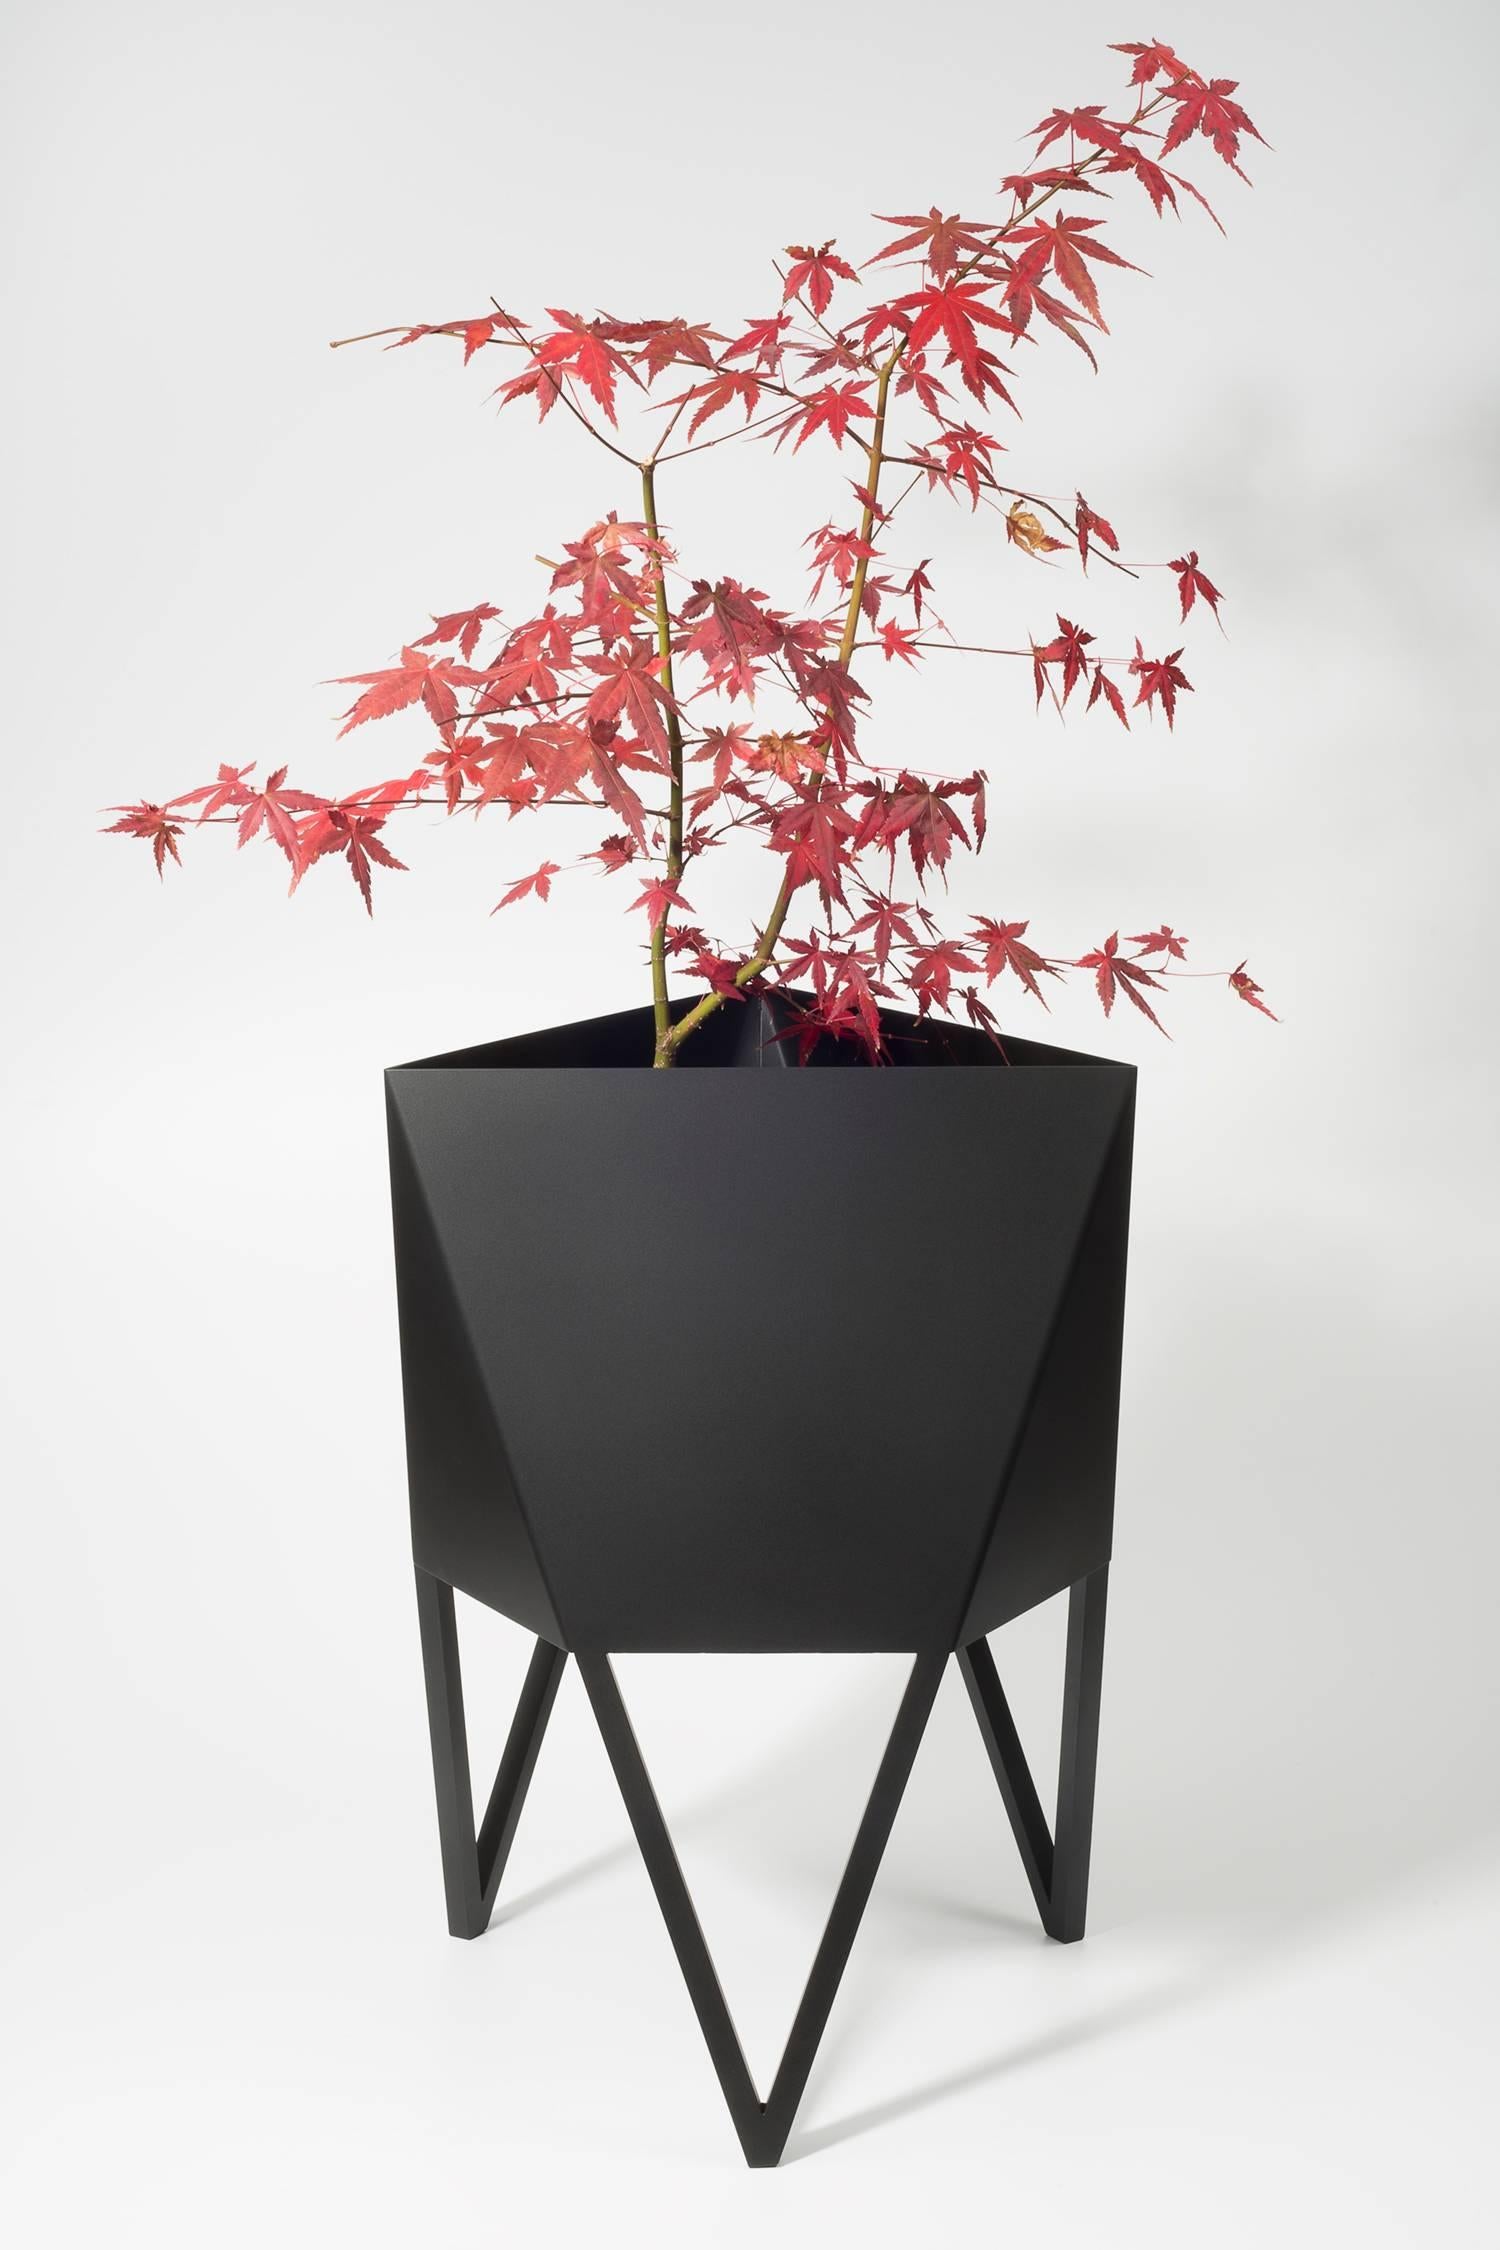 Contemporary Deca Planter in Living Coral Steel, Medium, by Force/Collide